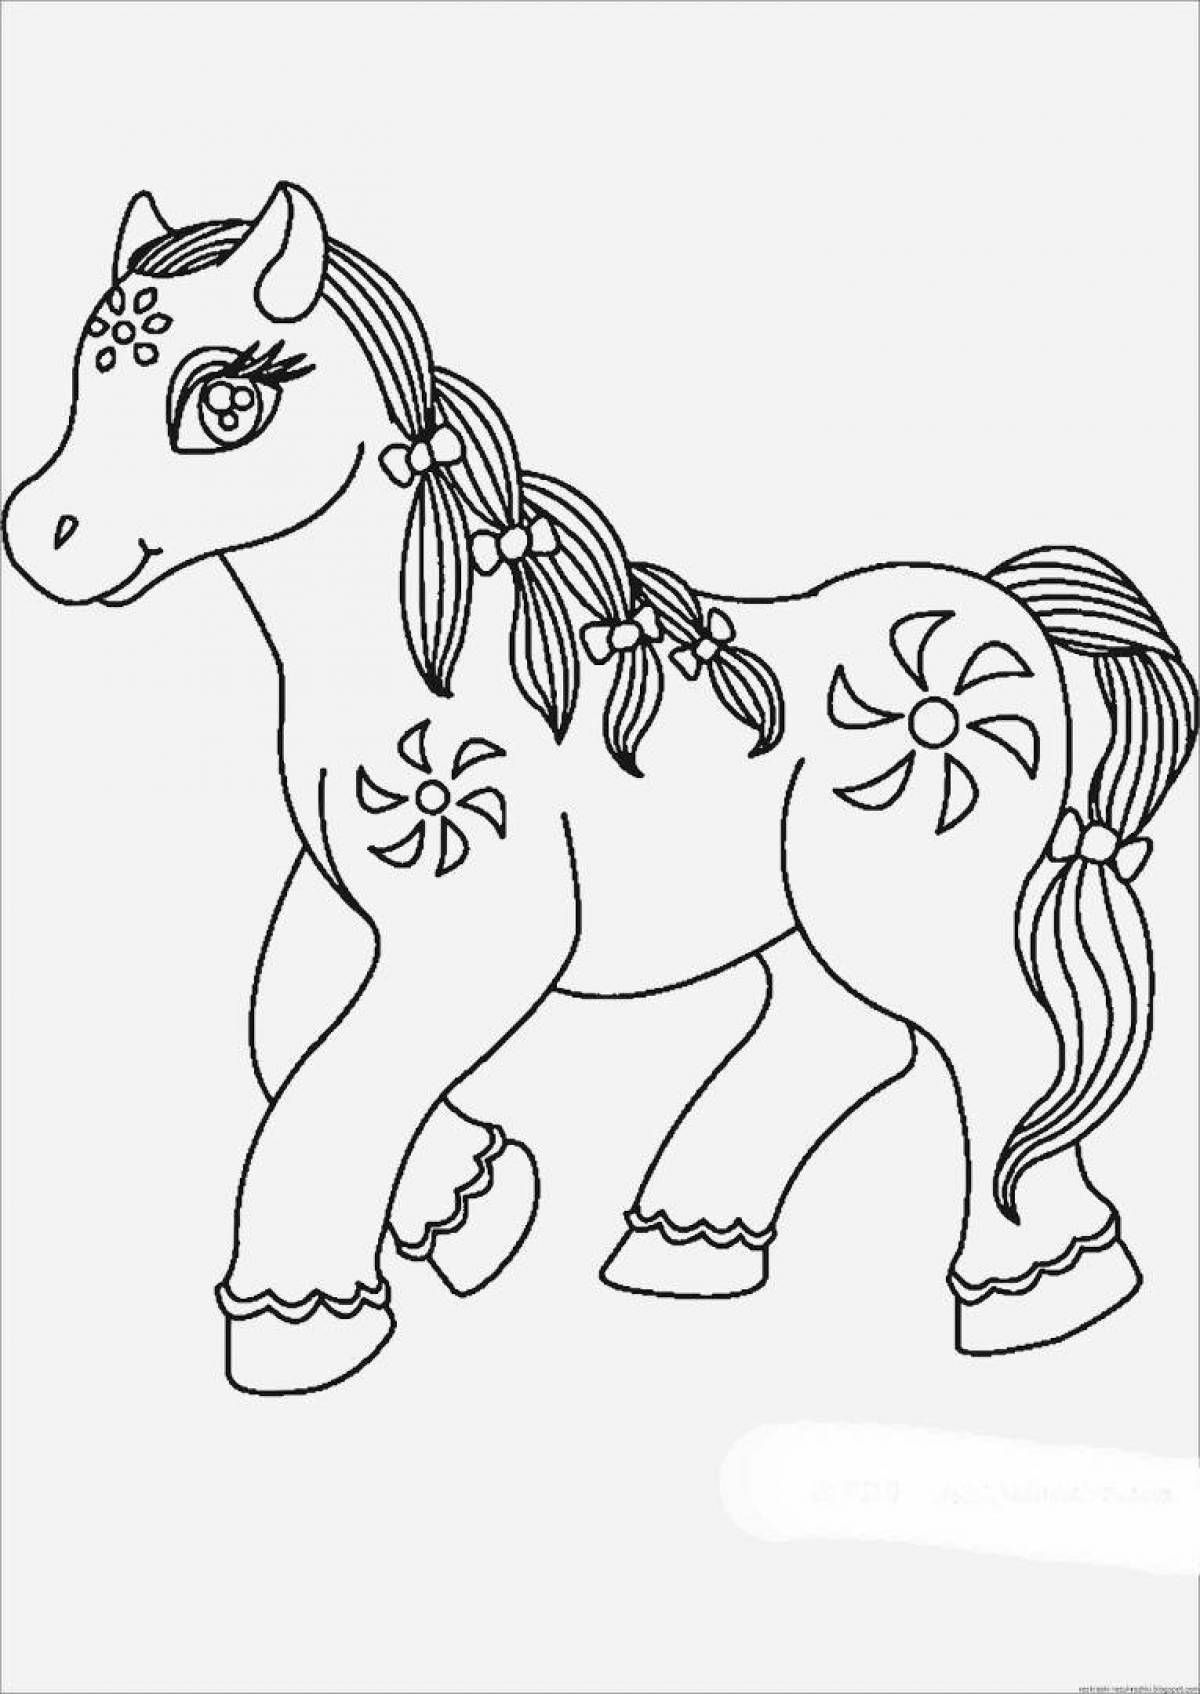 Great horse coloring book for 3-4 year olds